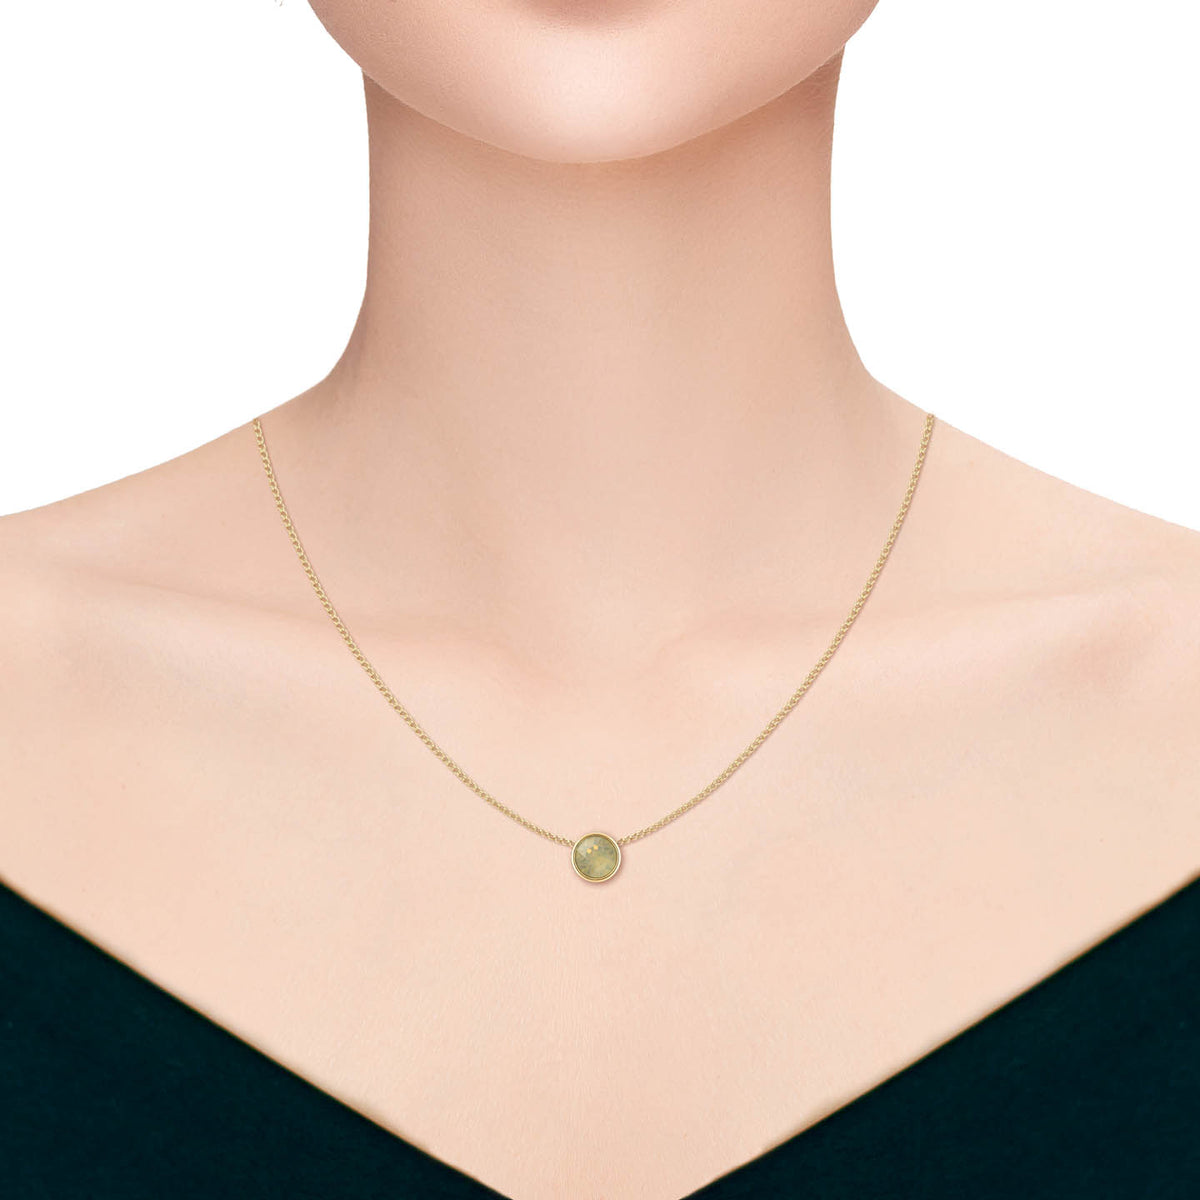 Harley Small Pendant Necklace with Beige Sand Round Opals from Swarovski Gold Plated - Ed Heart